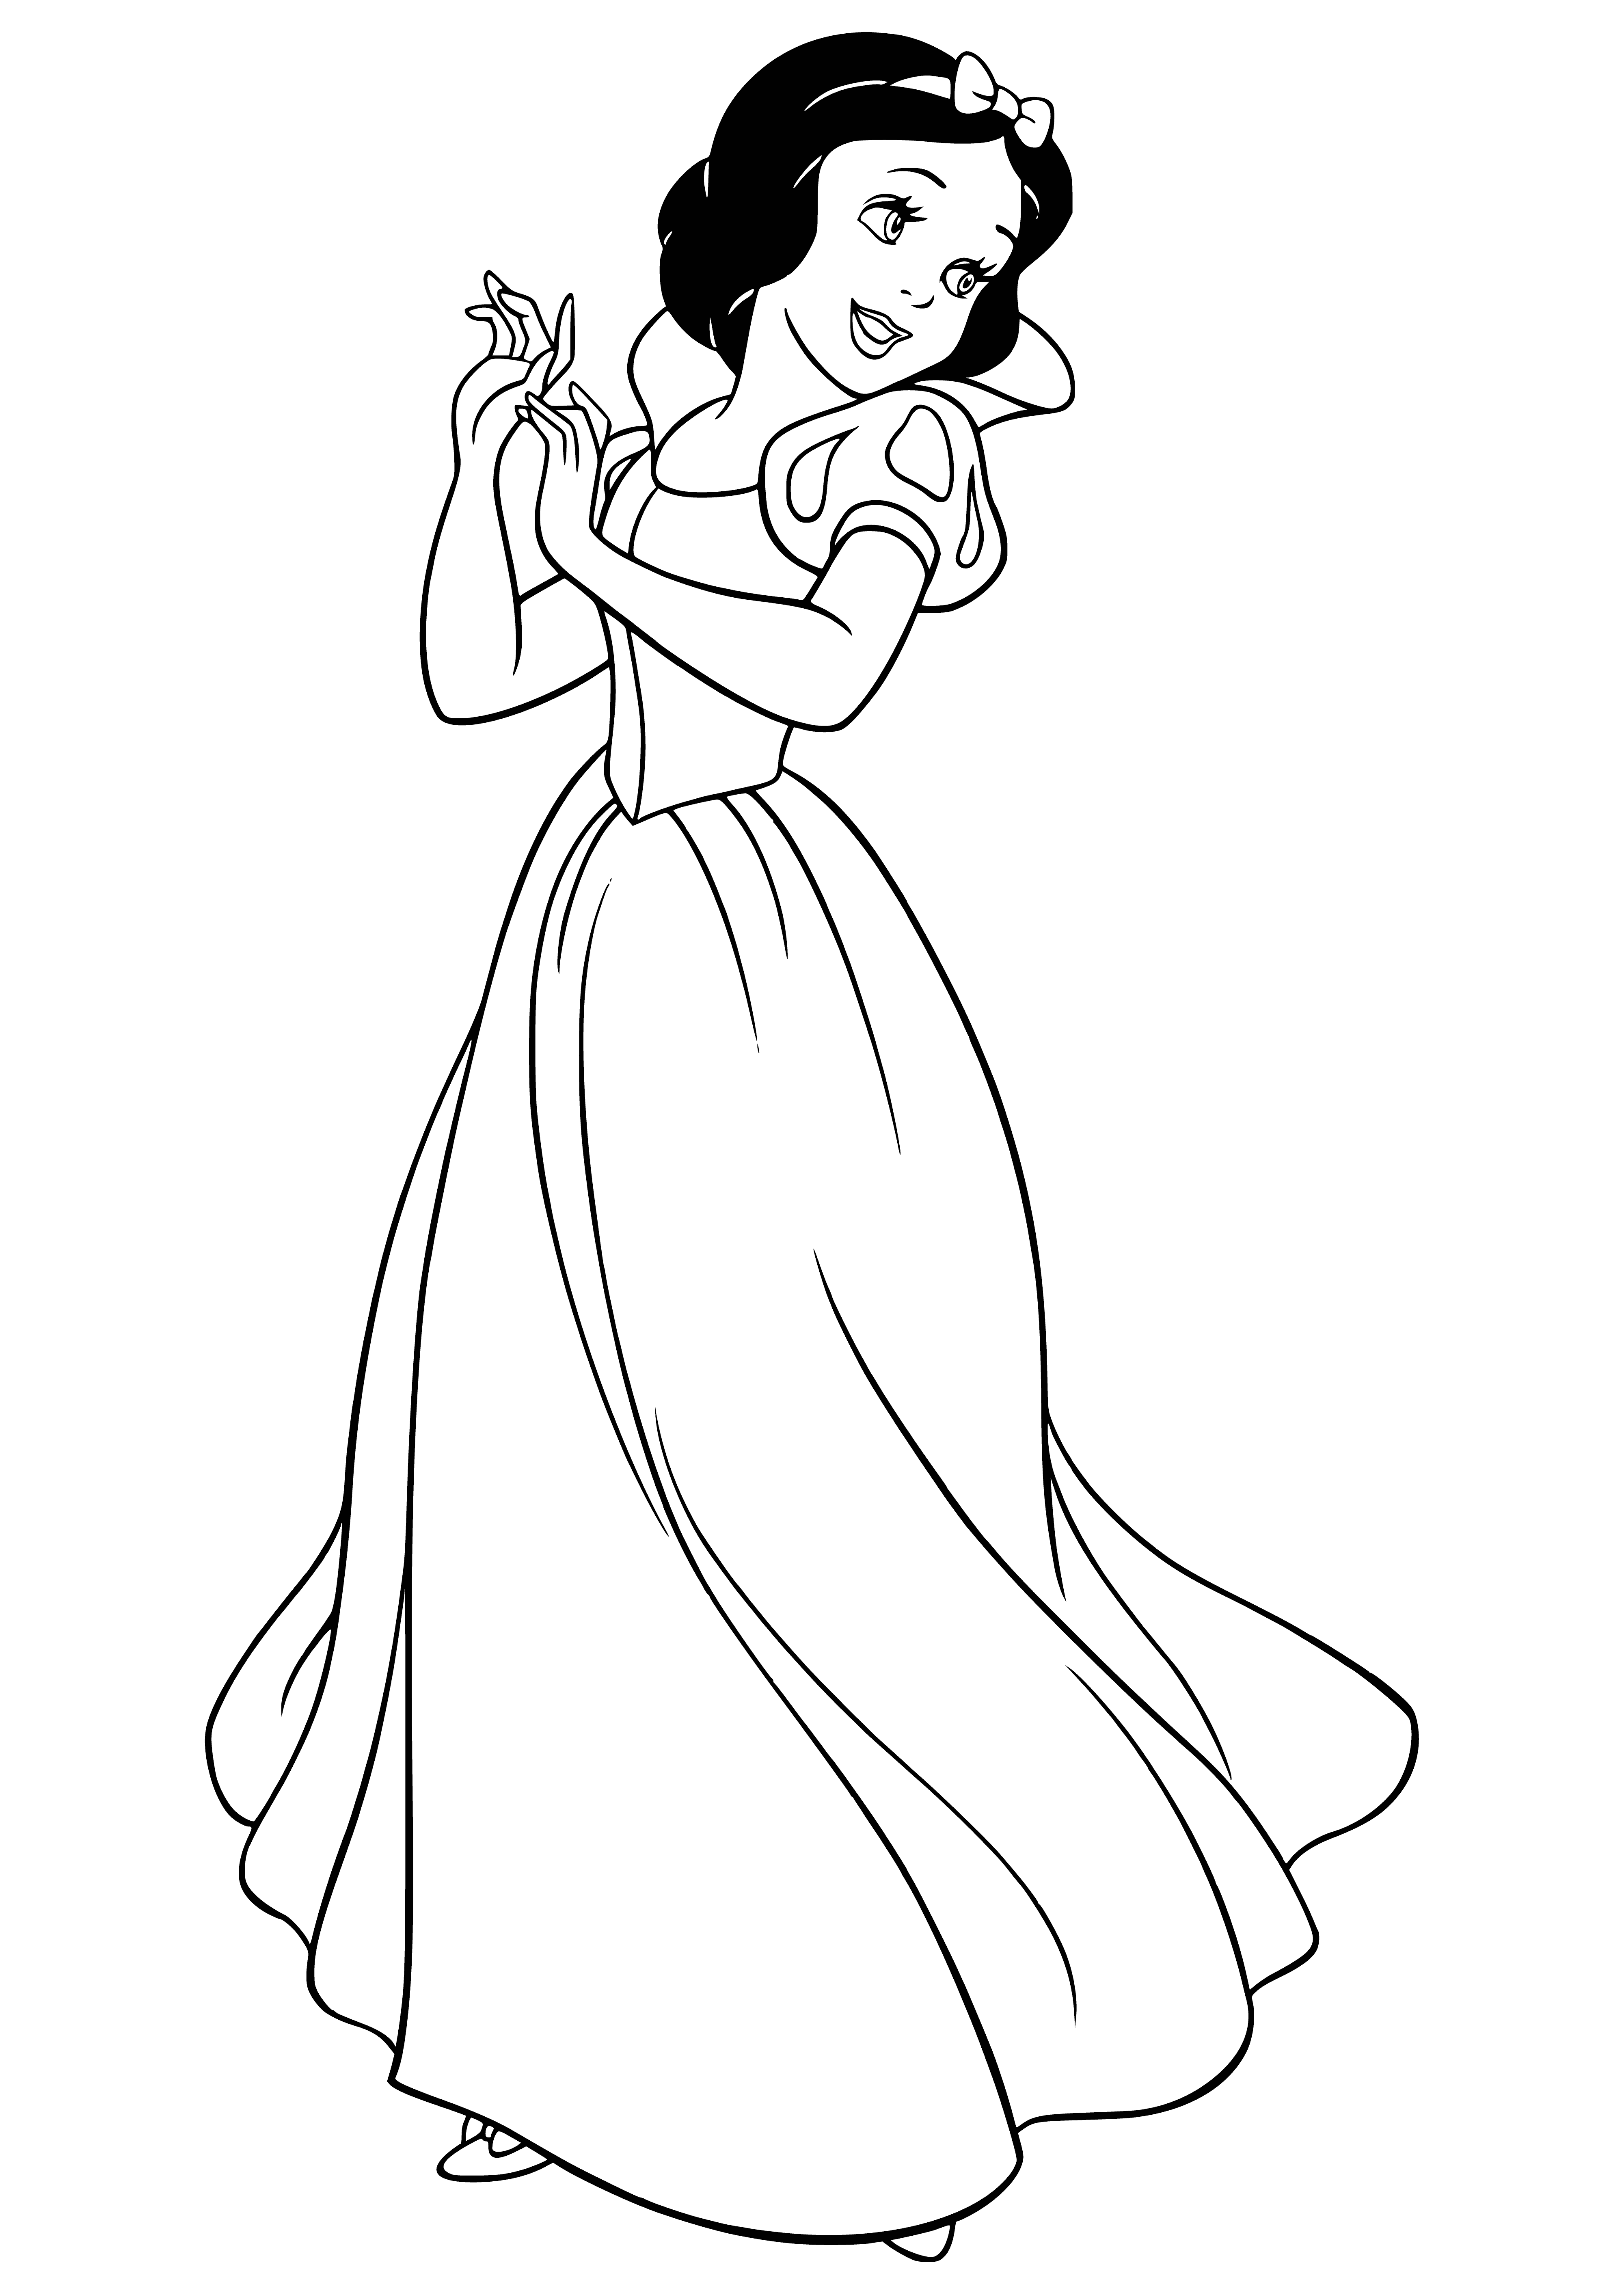 coloring page: A girl in a white dress and red cape stands surrounded by seven small men wearing oversized clothes, with round noses. She looks joyful.